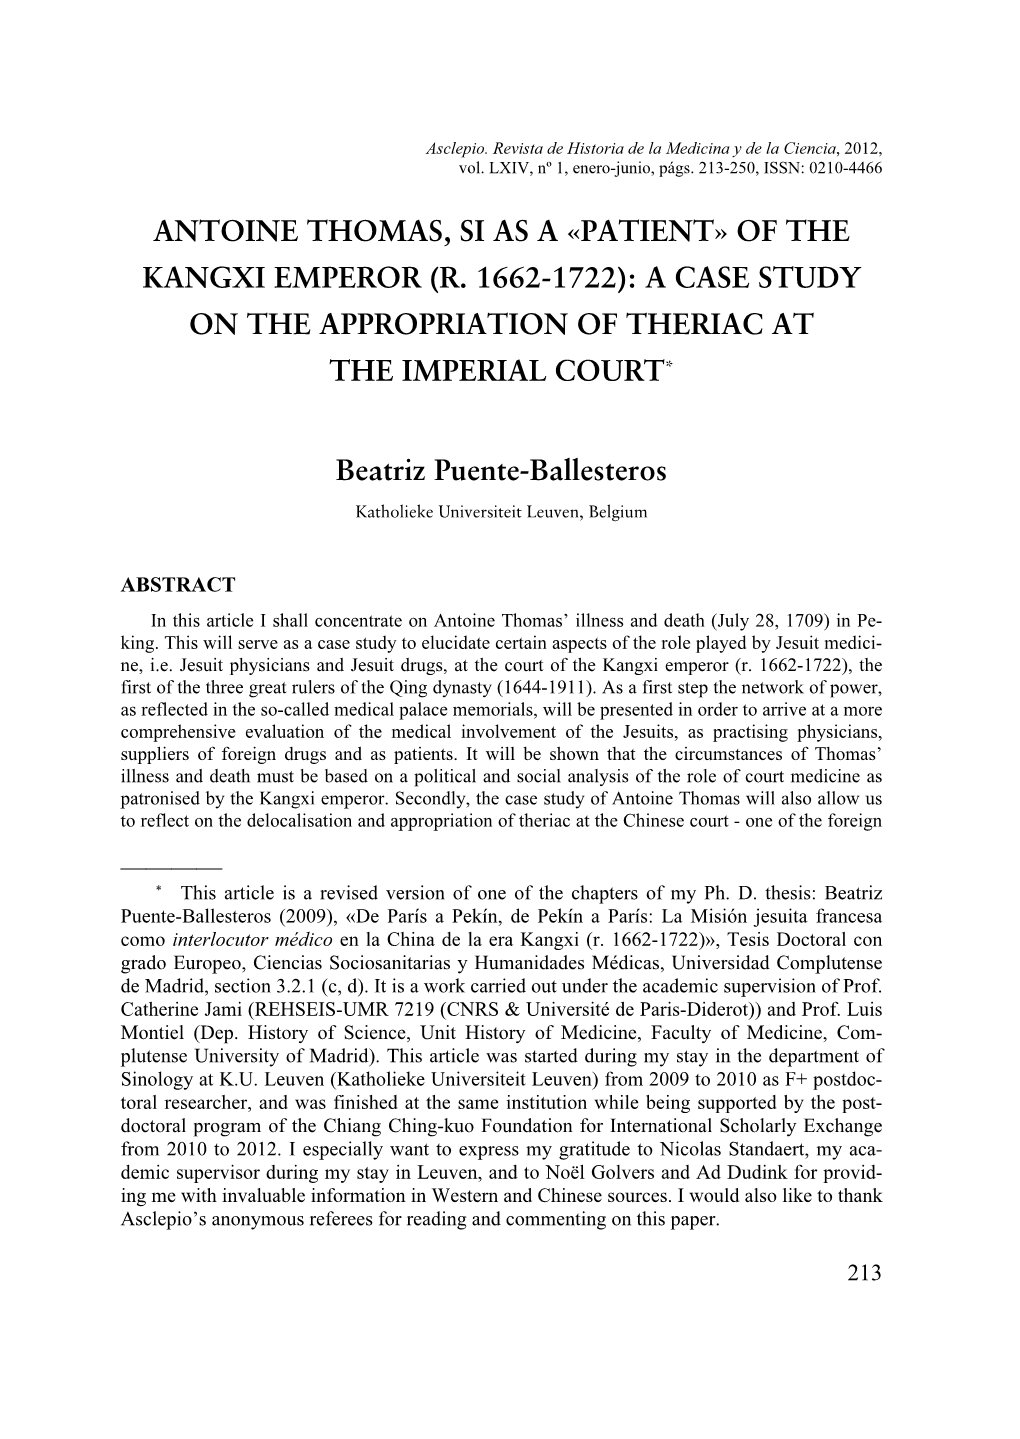 Antoine Thomas, Si As a «Patient» of the Kangxi Emperor (R. 1662-1722): a Case Study on the Appropriation of Theriac at the Imperial Court*